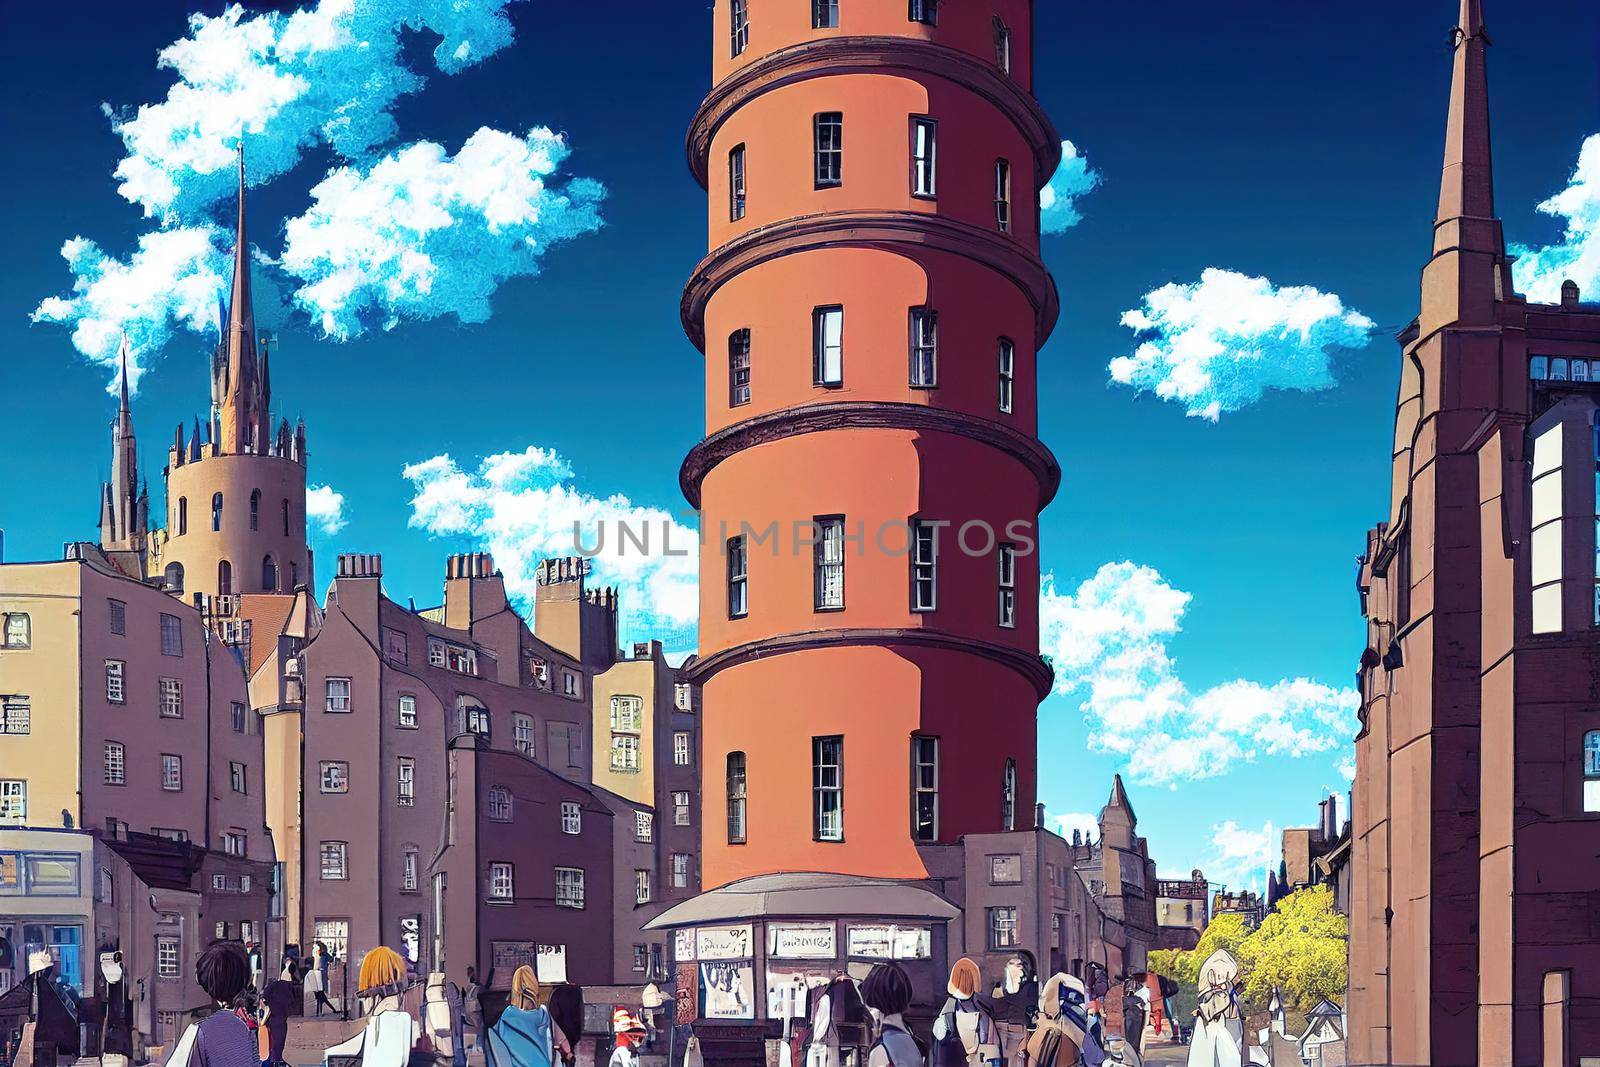 anime Tourists walking around the capital city This is a famous landmark Edinurgh city centre scotland Uk th 2 , Anime style no watermark